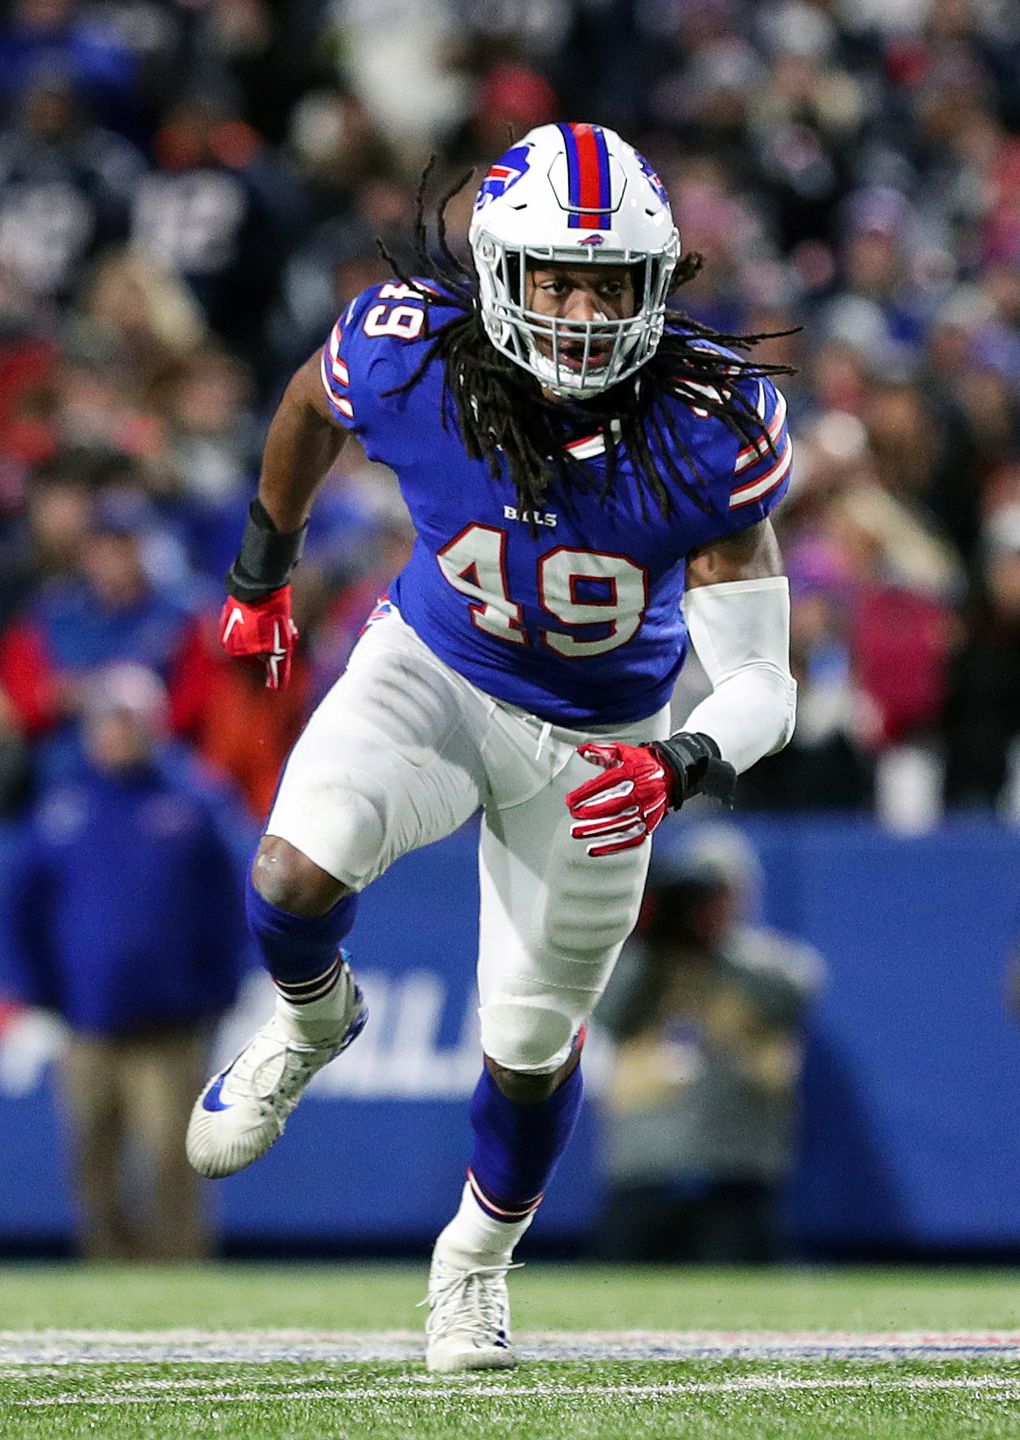 Since the Bills drafted Tremaine Edmunds in 2018, he's had some up